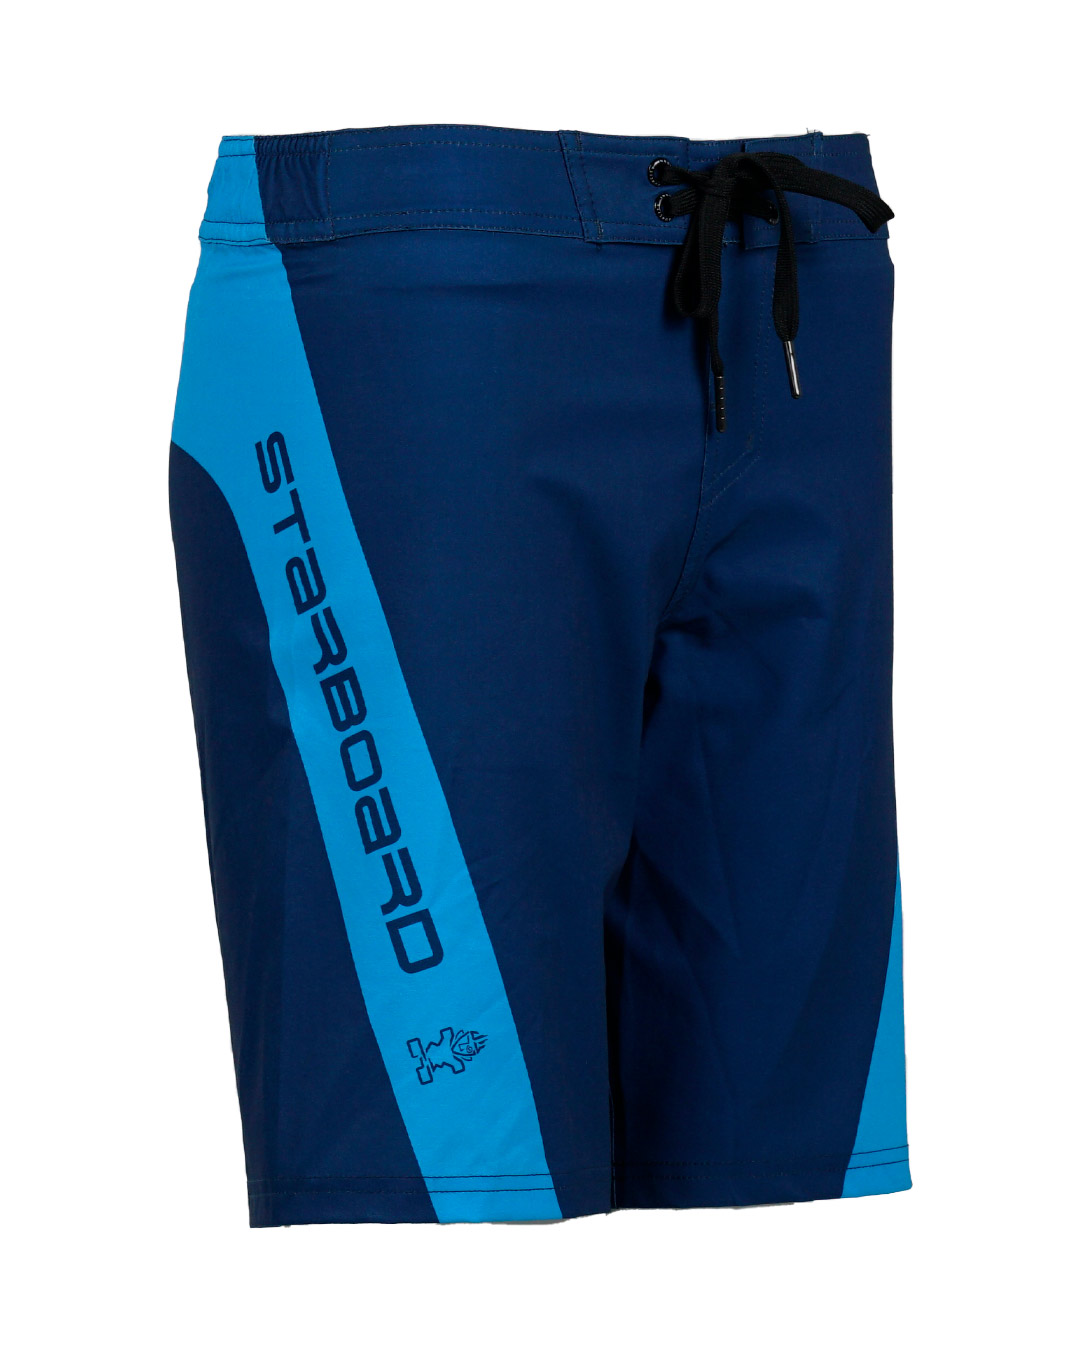 Mens Boardshorts Collection » Starboard Apparel